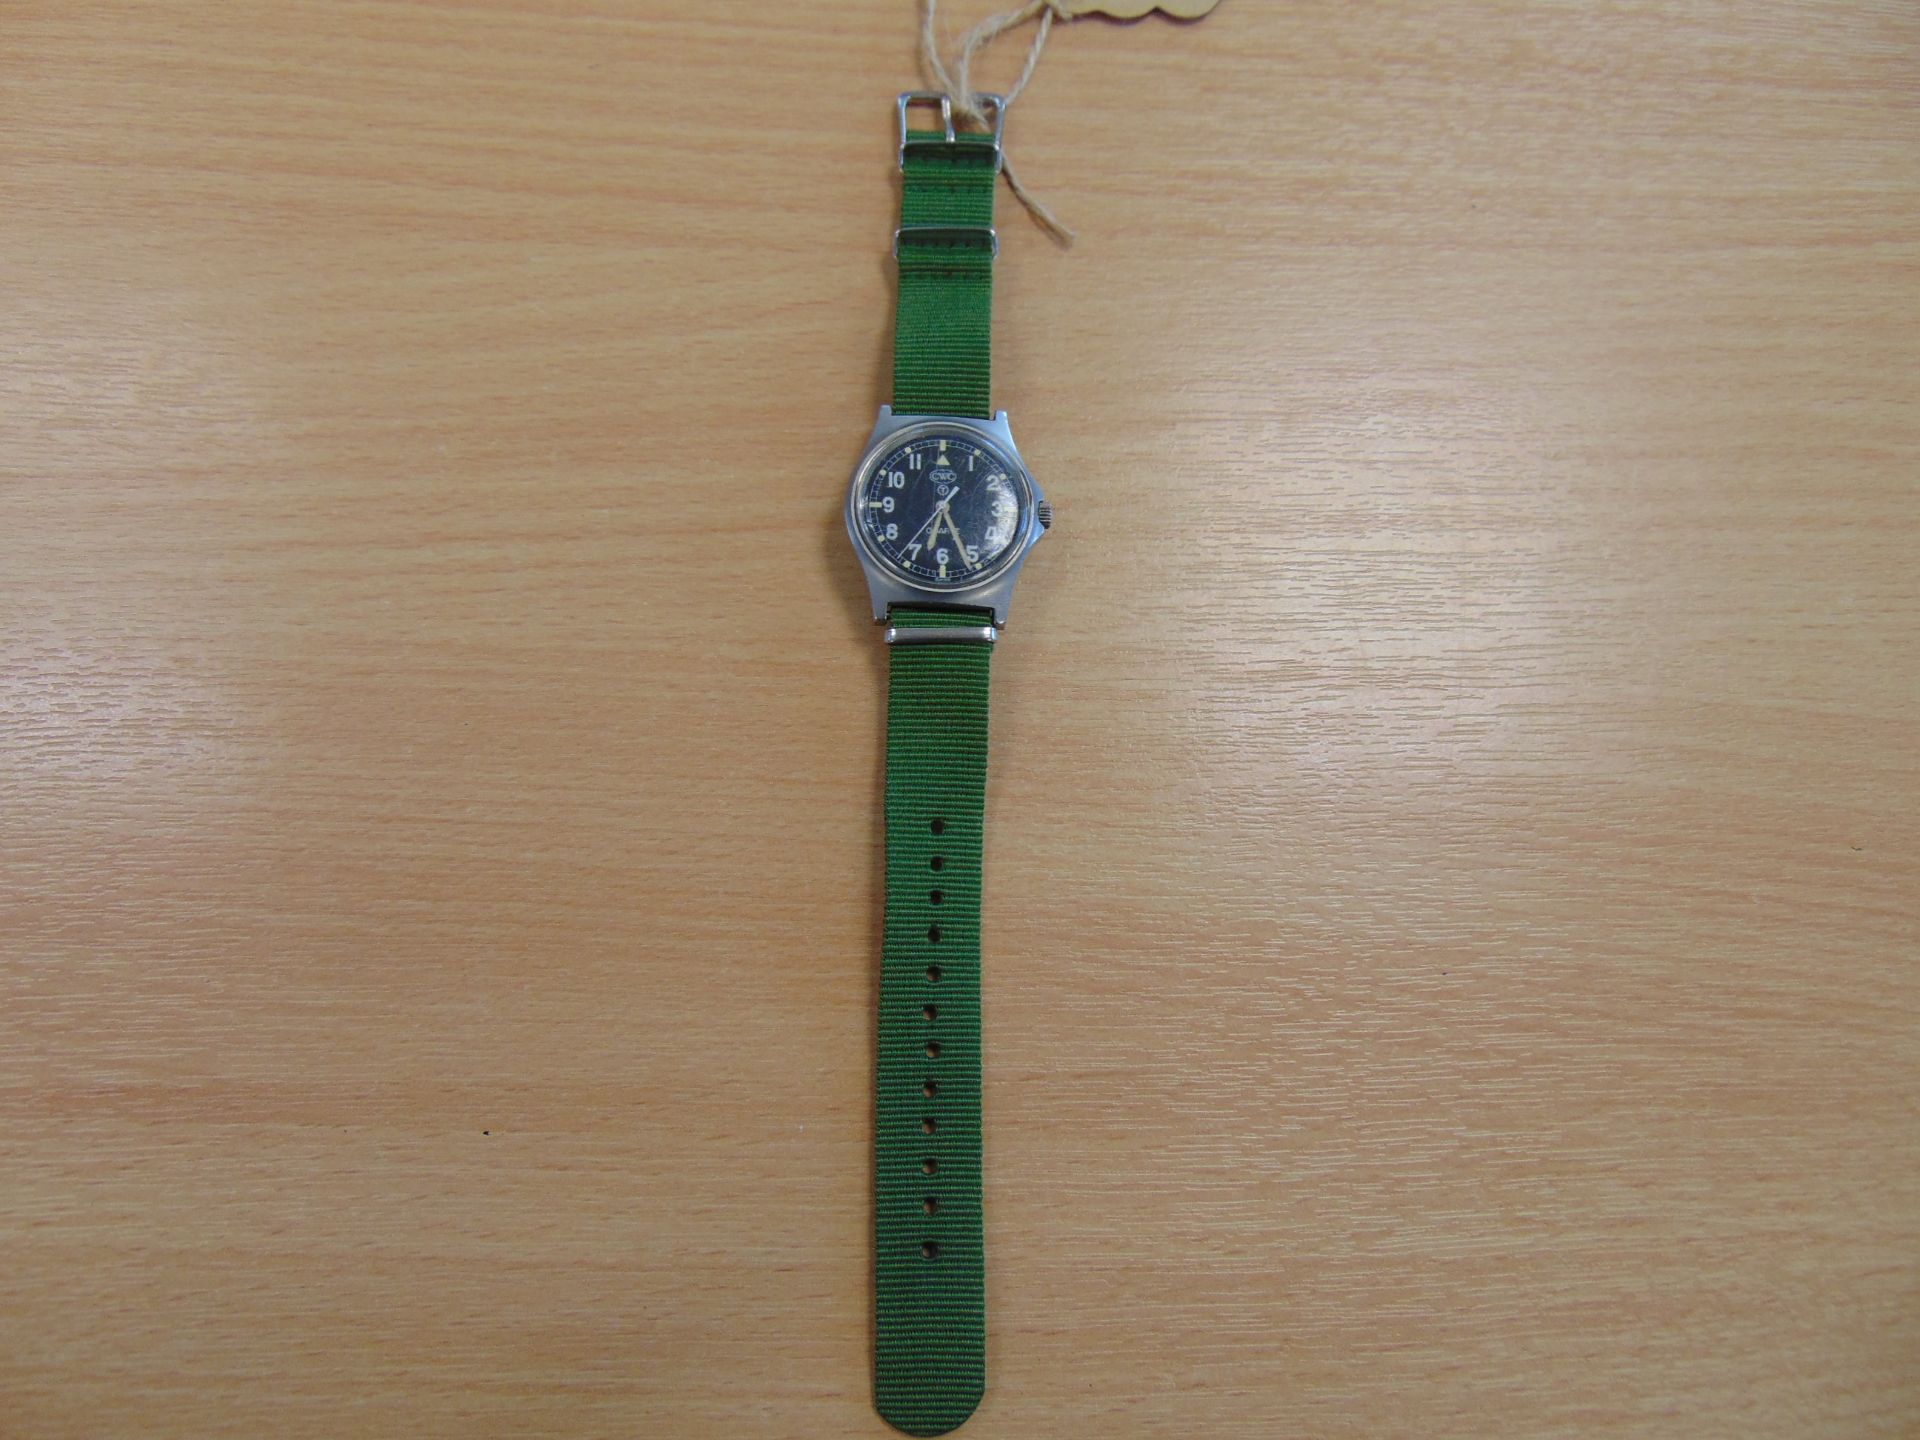 V.Rare CWC W10 Fat Boy Service Watch British Army Issue Nato Marks, Date 1984 - Image 5 of 6